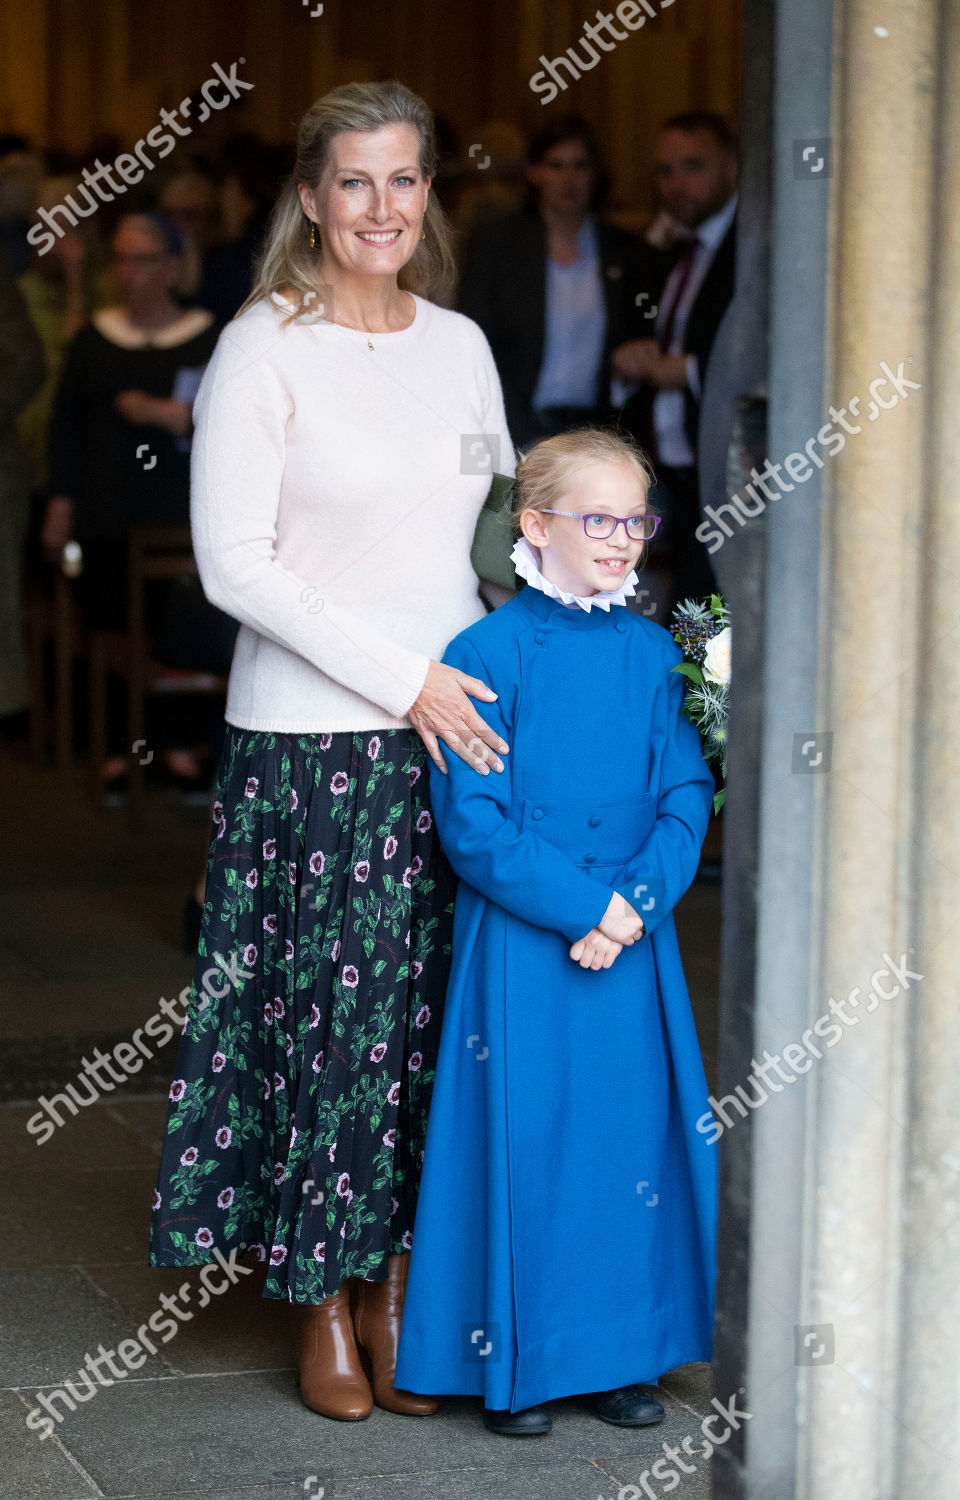 sophie-countess-of-wessex-visit-to-wells-cathedral-and-cathedral-school-somerset-uk-shutterstock-editorial-10422906u.jpg